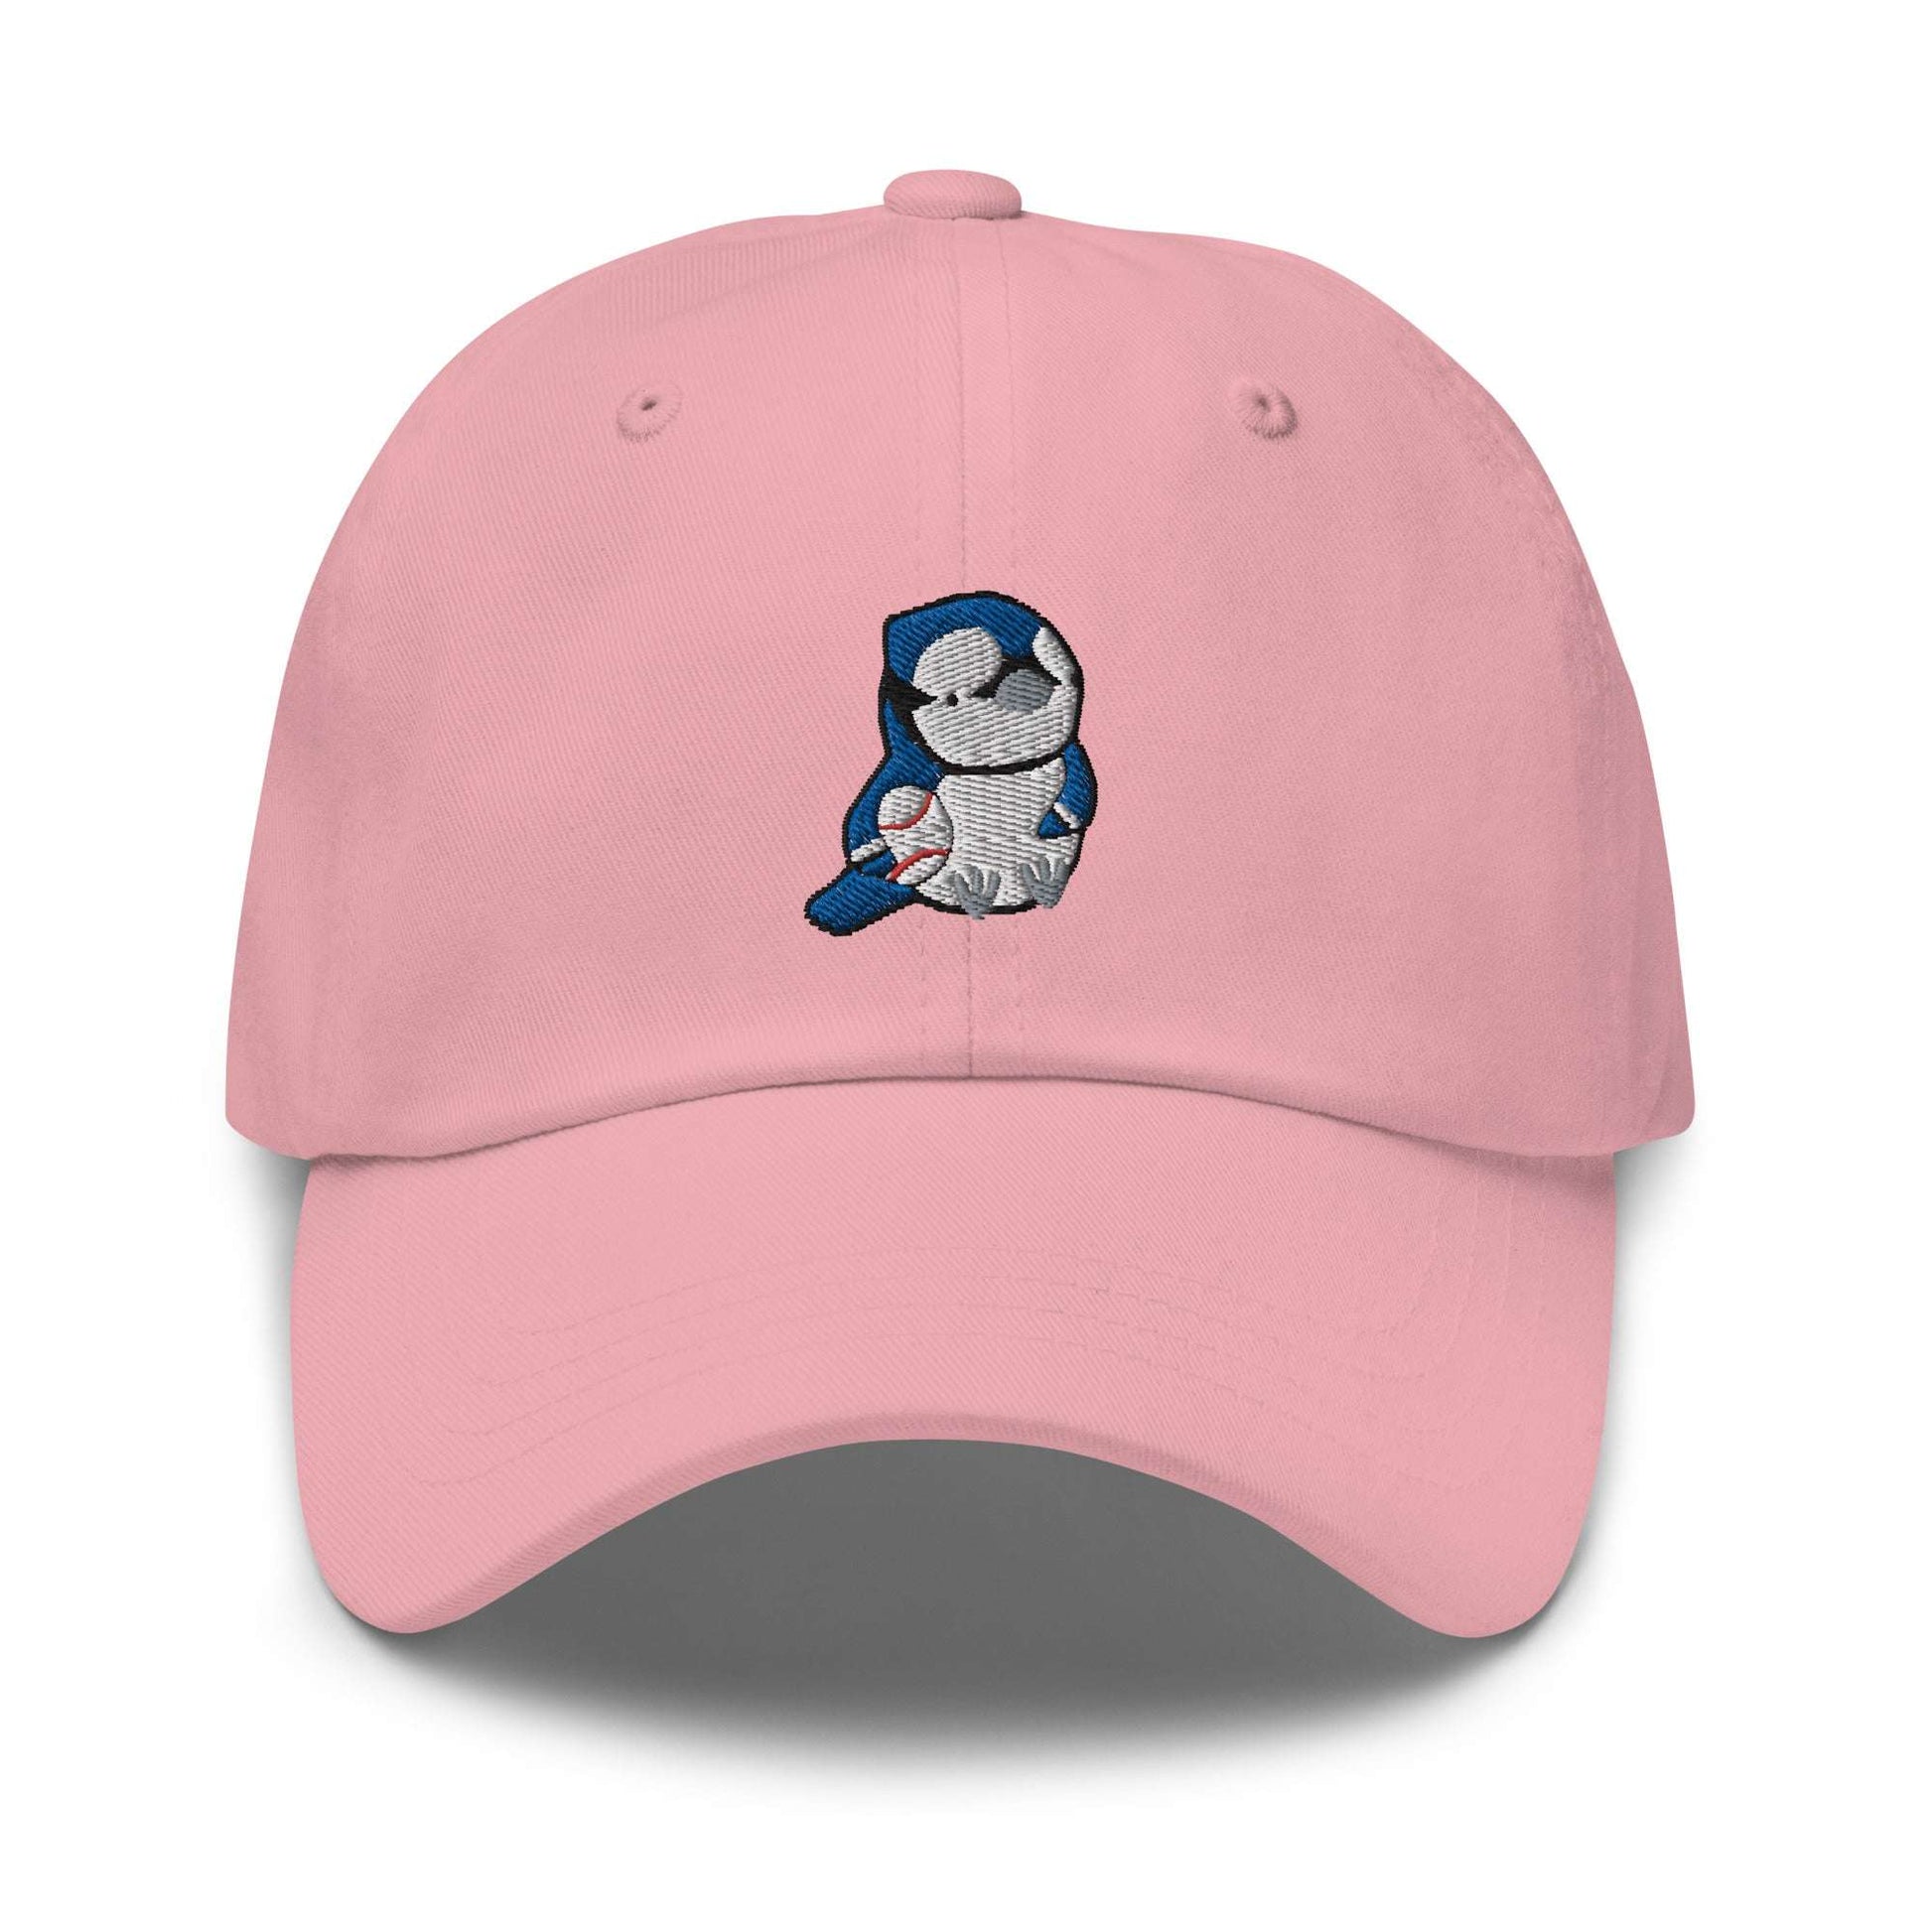 Embroidered Blue Jay Baseball Cap: Pink